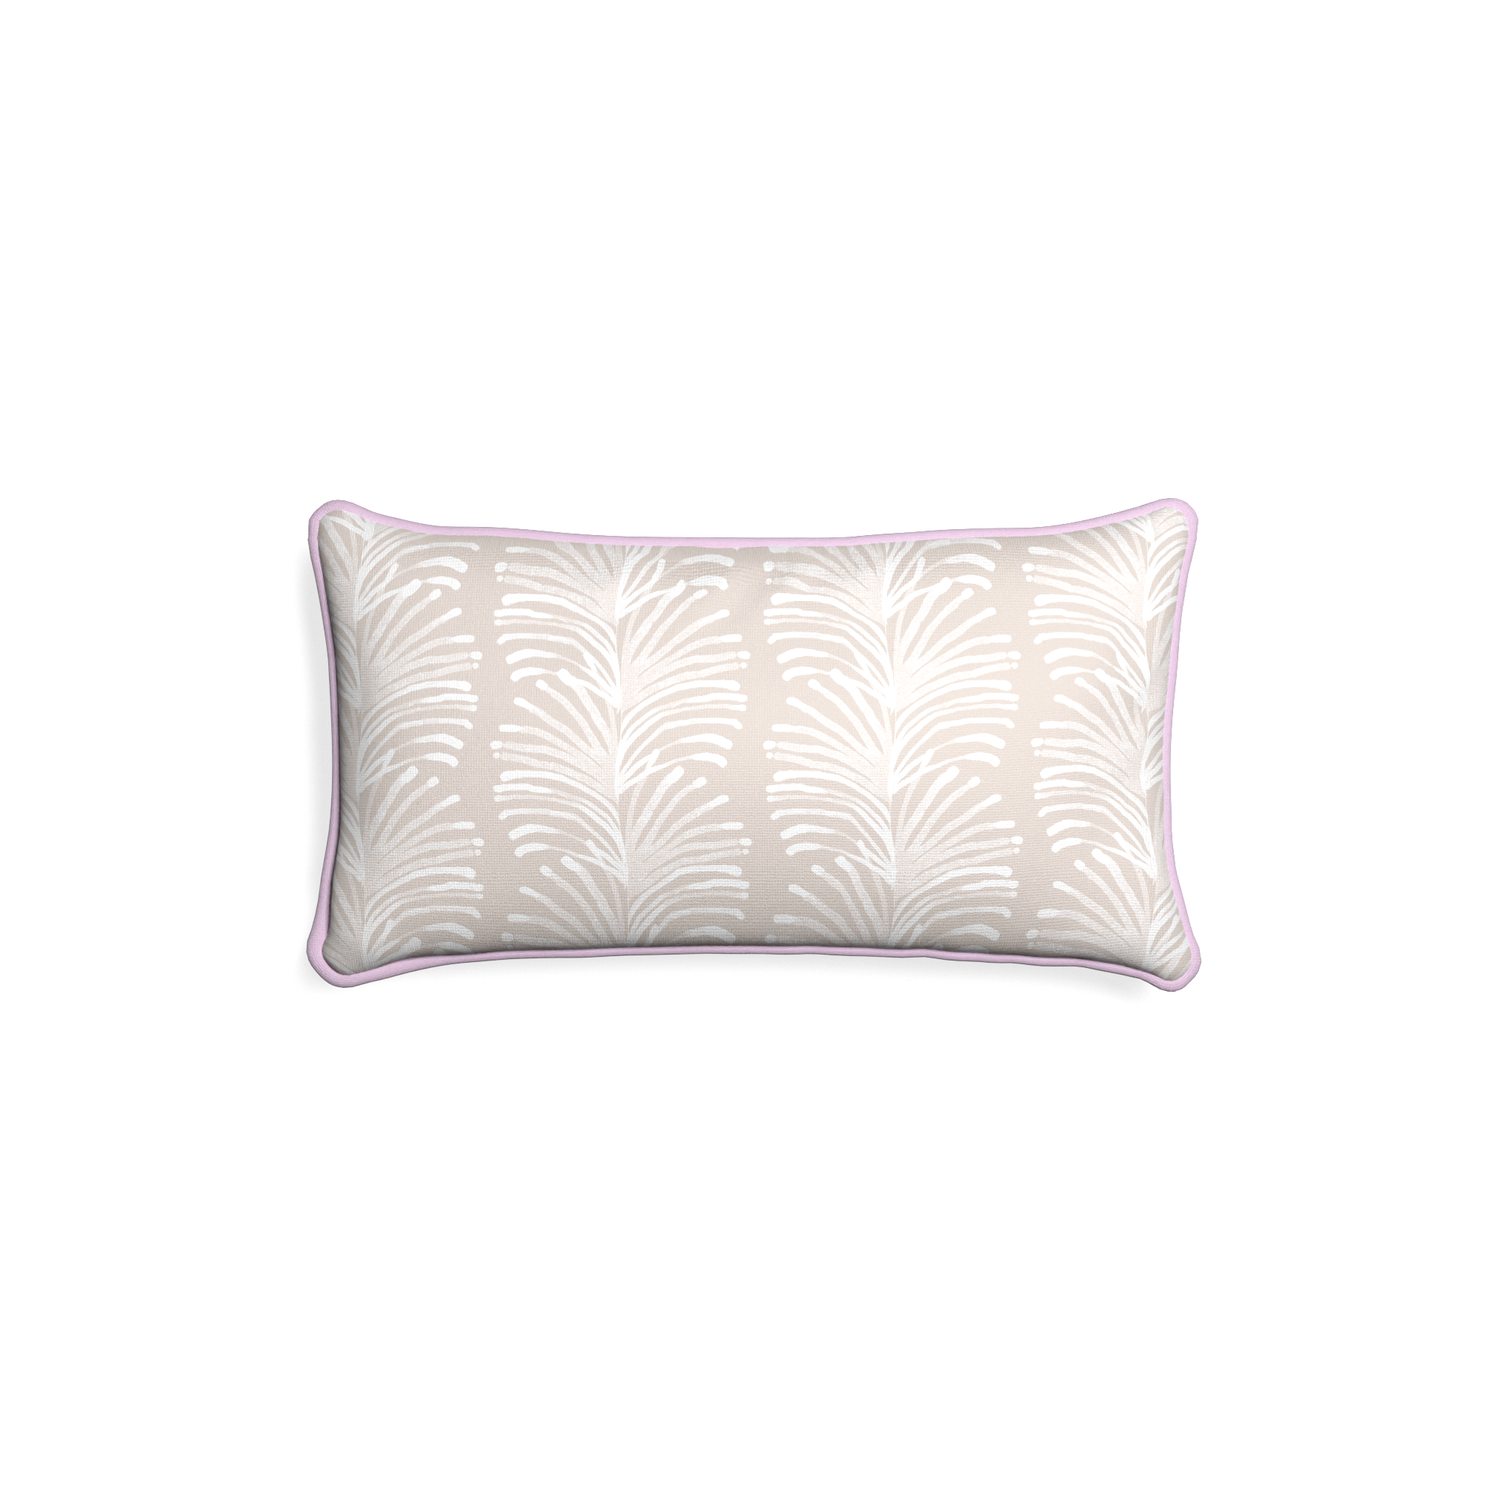 Petite-lumbar emma sand custom sand colored botanical stripepillow with l piping on white background